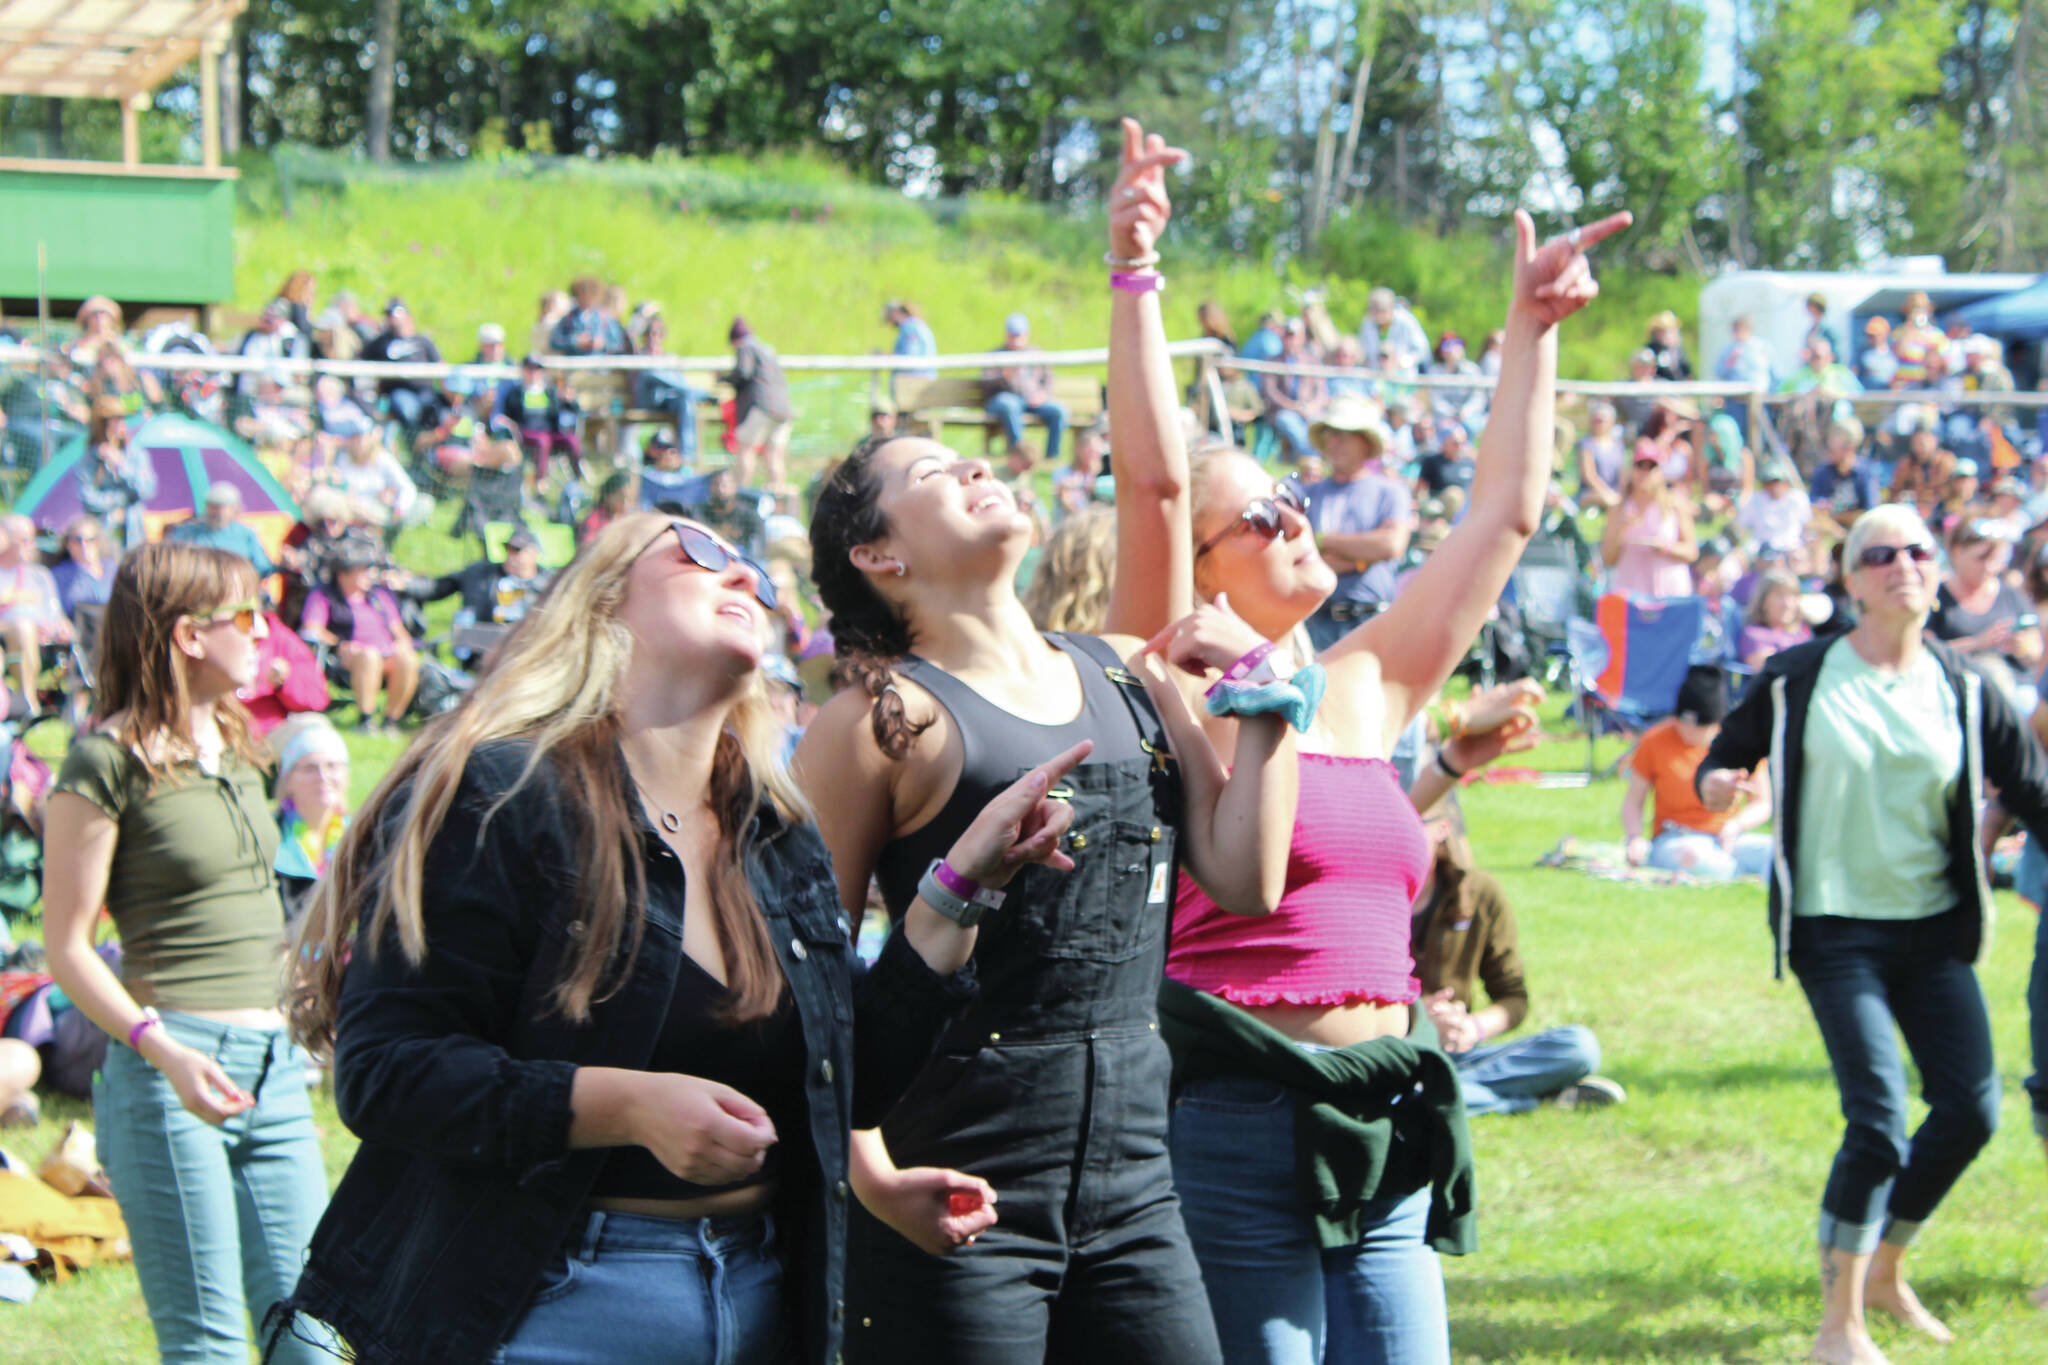 People gather in Ninilchik Aug. 5, 2022, for Salmonfest, an annual event that raises awareness about salmon-related causes. (Camille Botello/Peninsula Clarion)